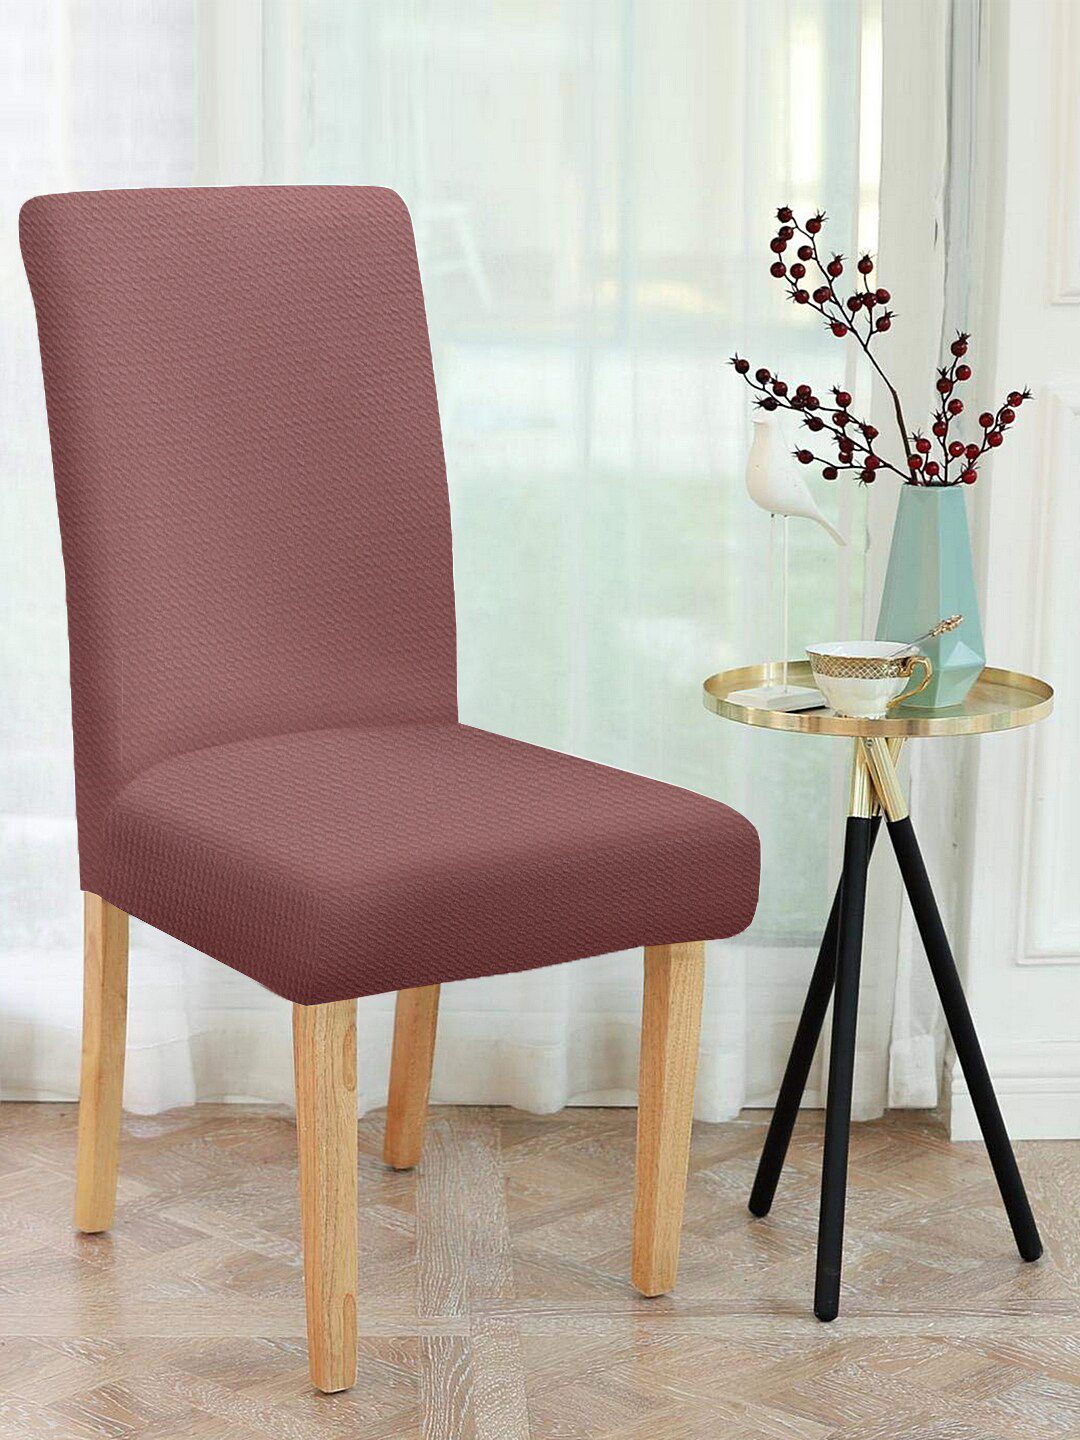 Cortina Set Of 8 Brown Self Design Chair Covers Price in India